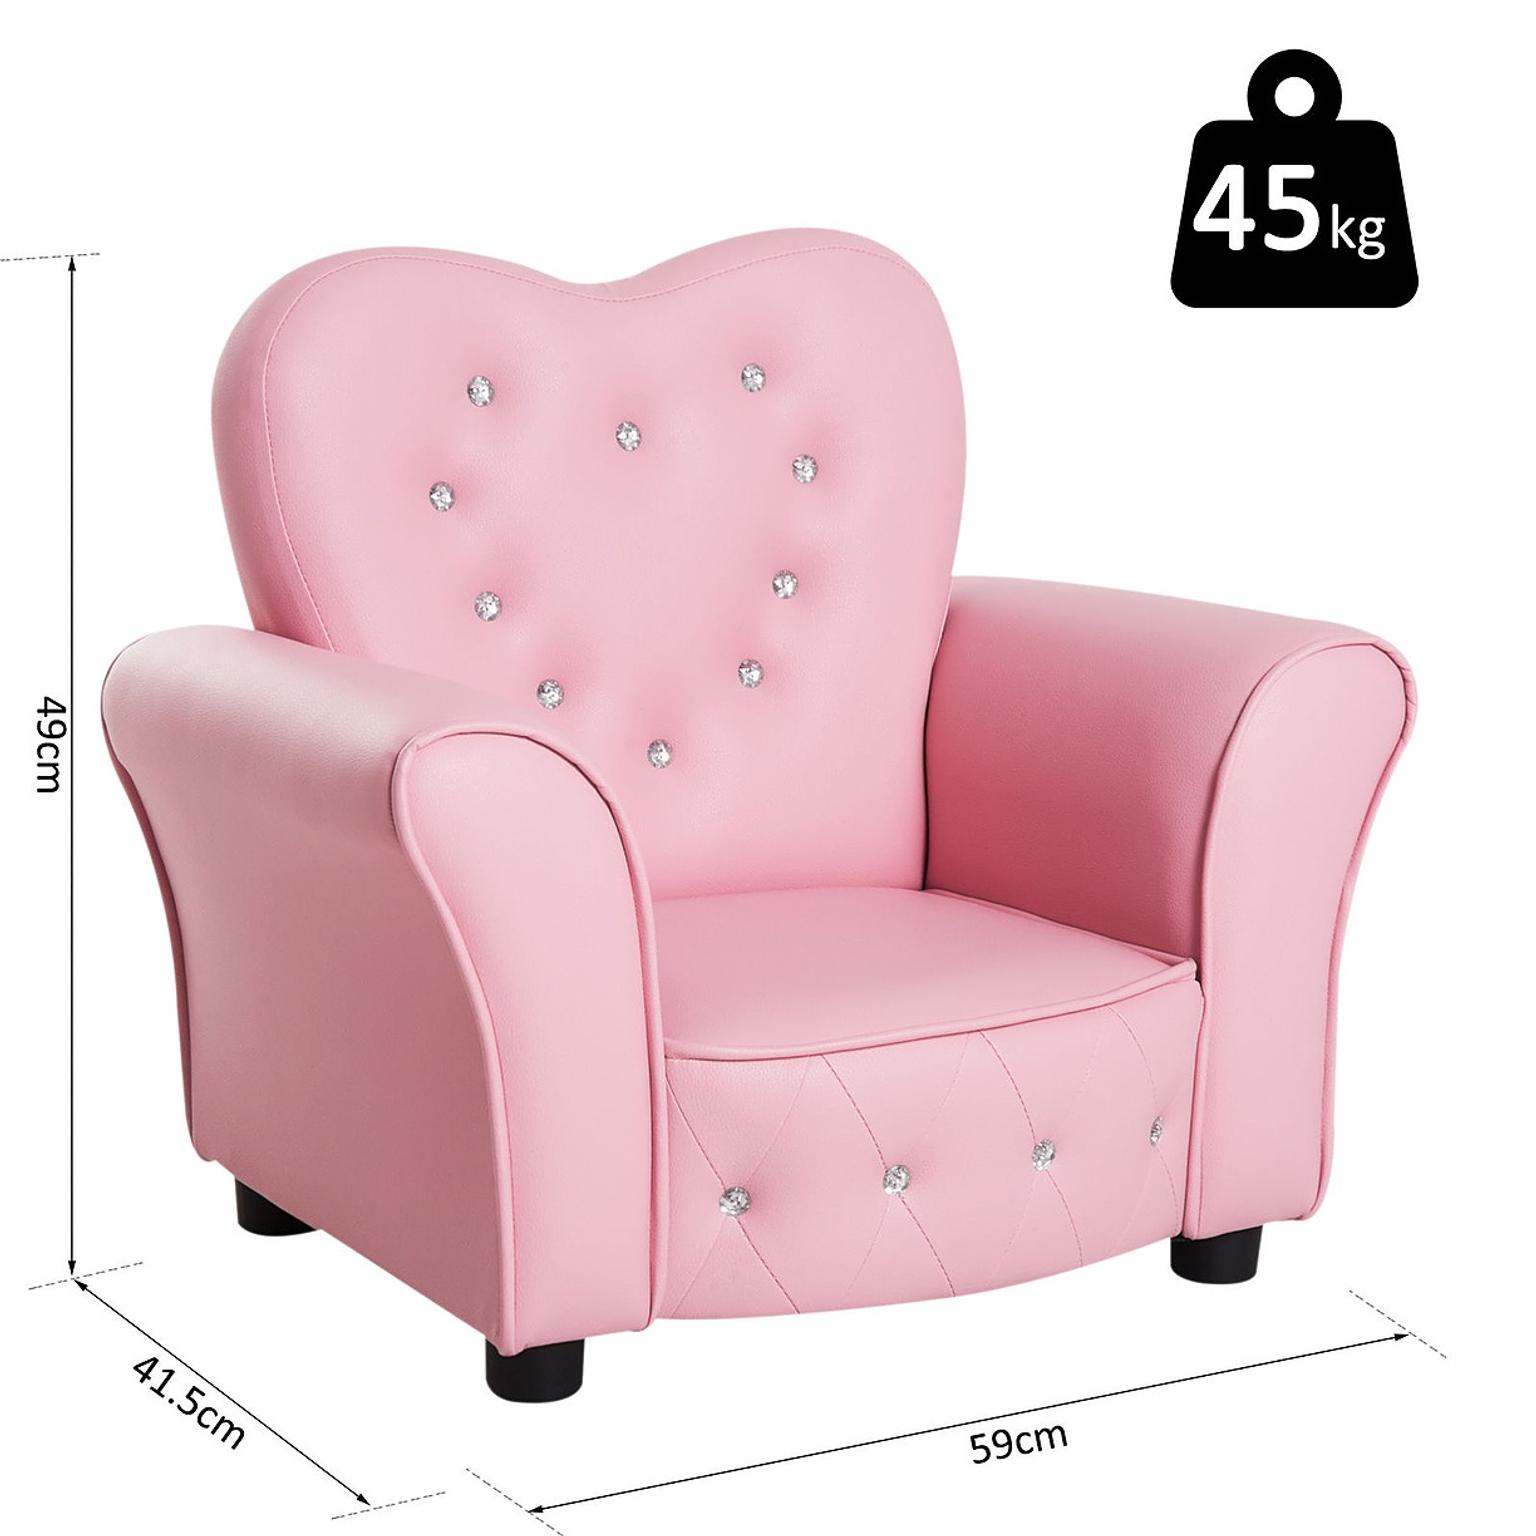 Princess Pink Bling Arm Chair In Ng5 6ae Nottingham For 65 00